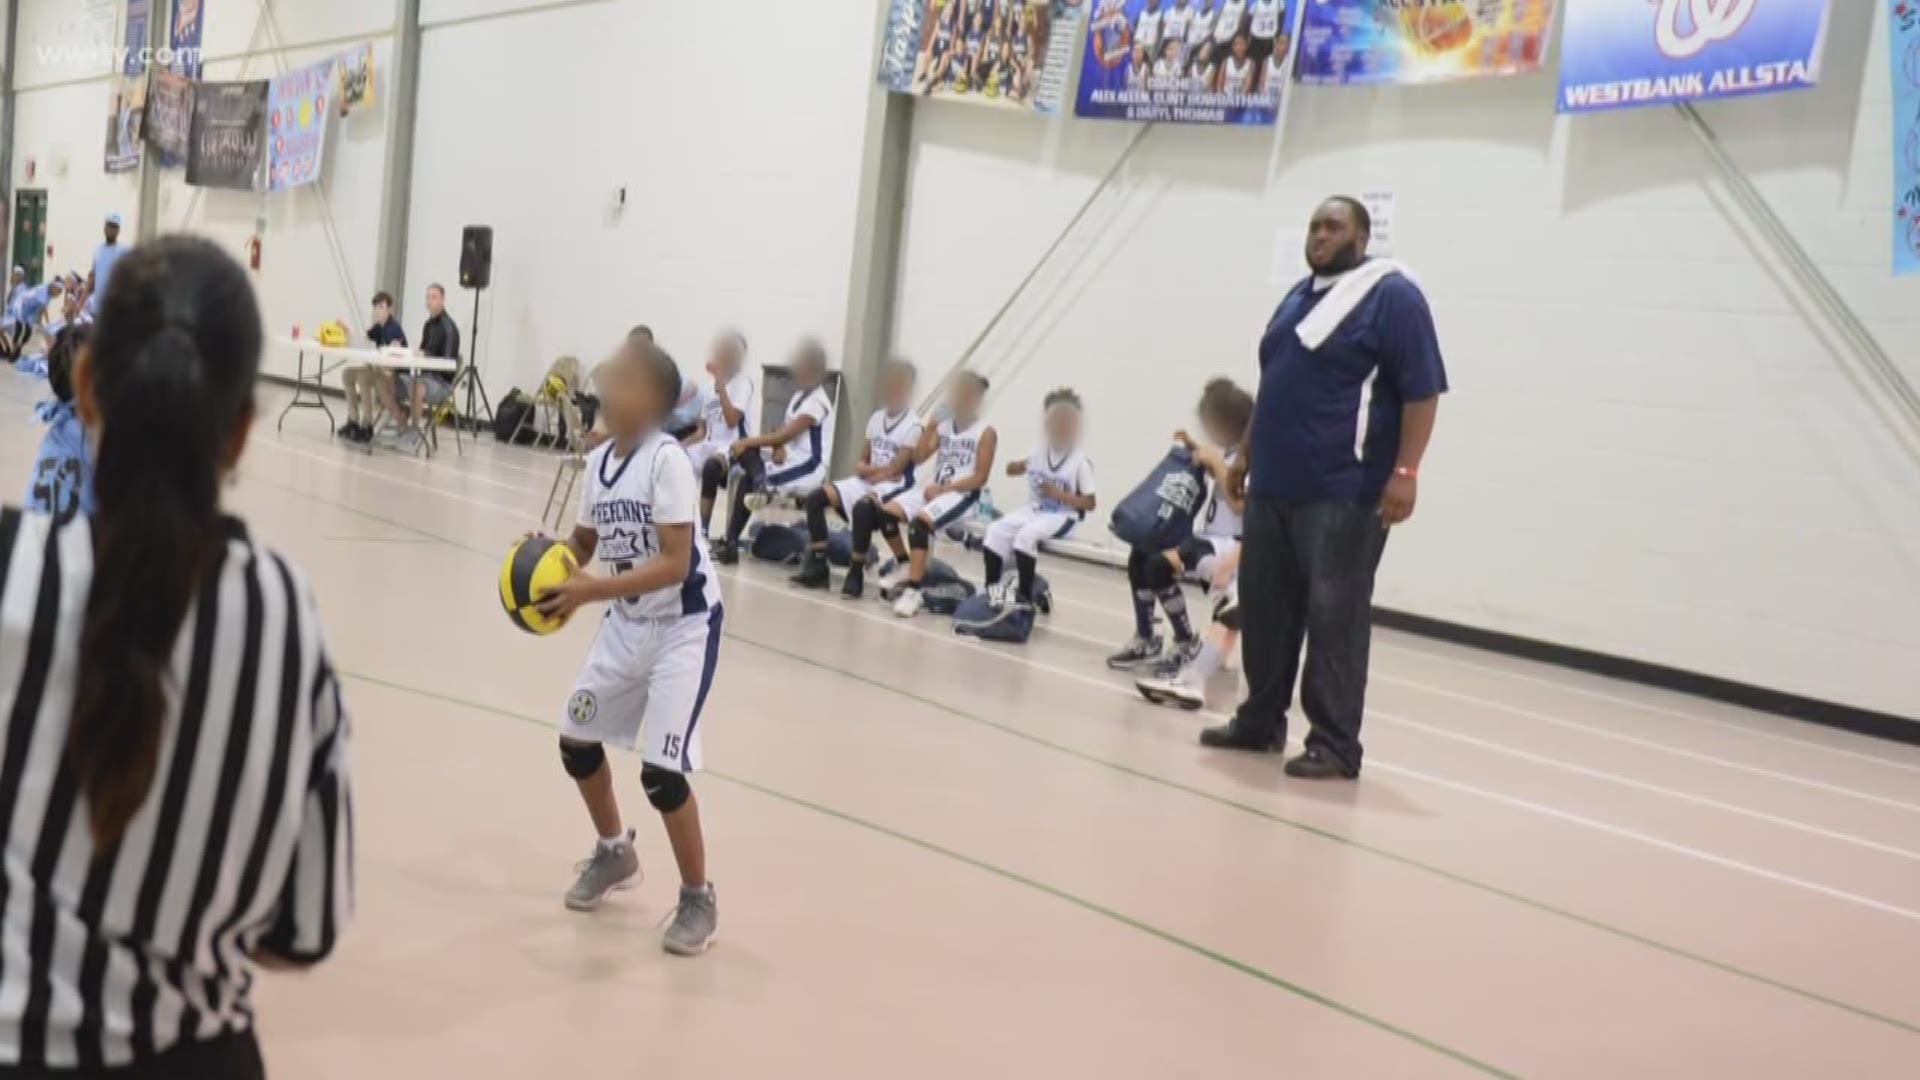 A judge did impose new restrictions from the bench Monday that would make any future coaching or unsupervised contact with children a violation of his probation.